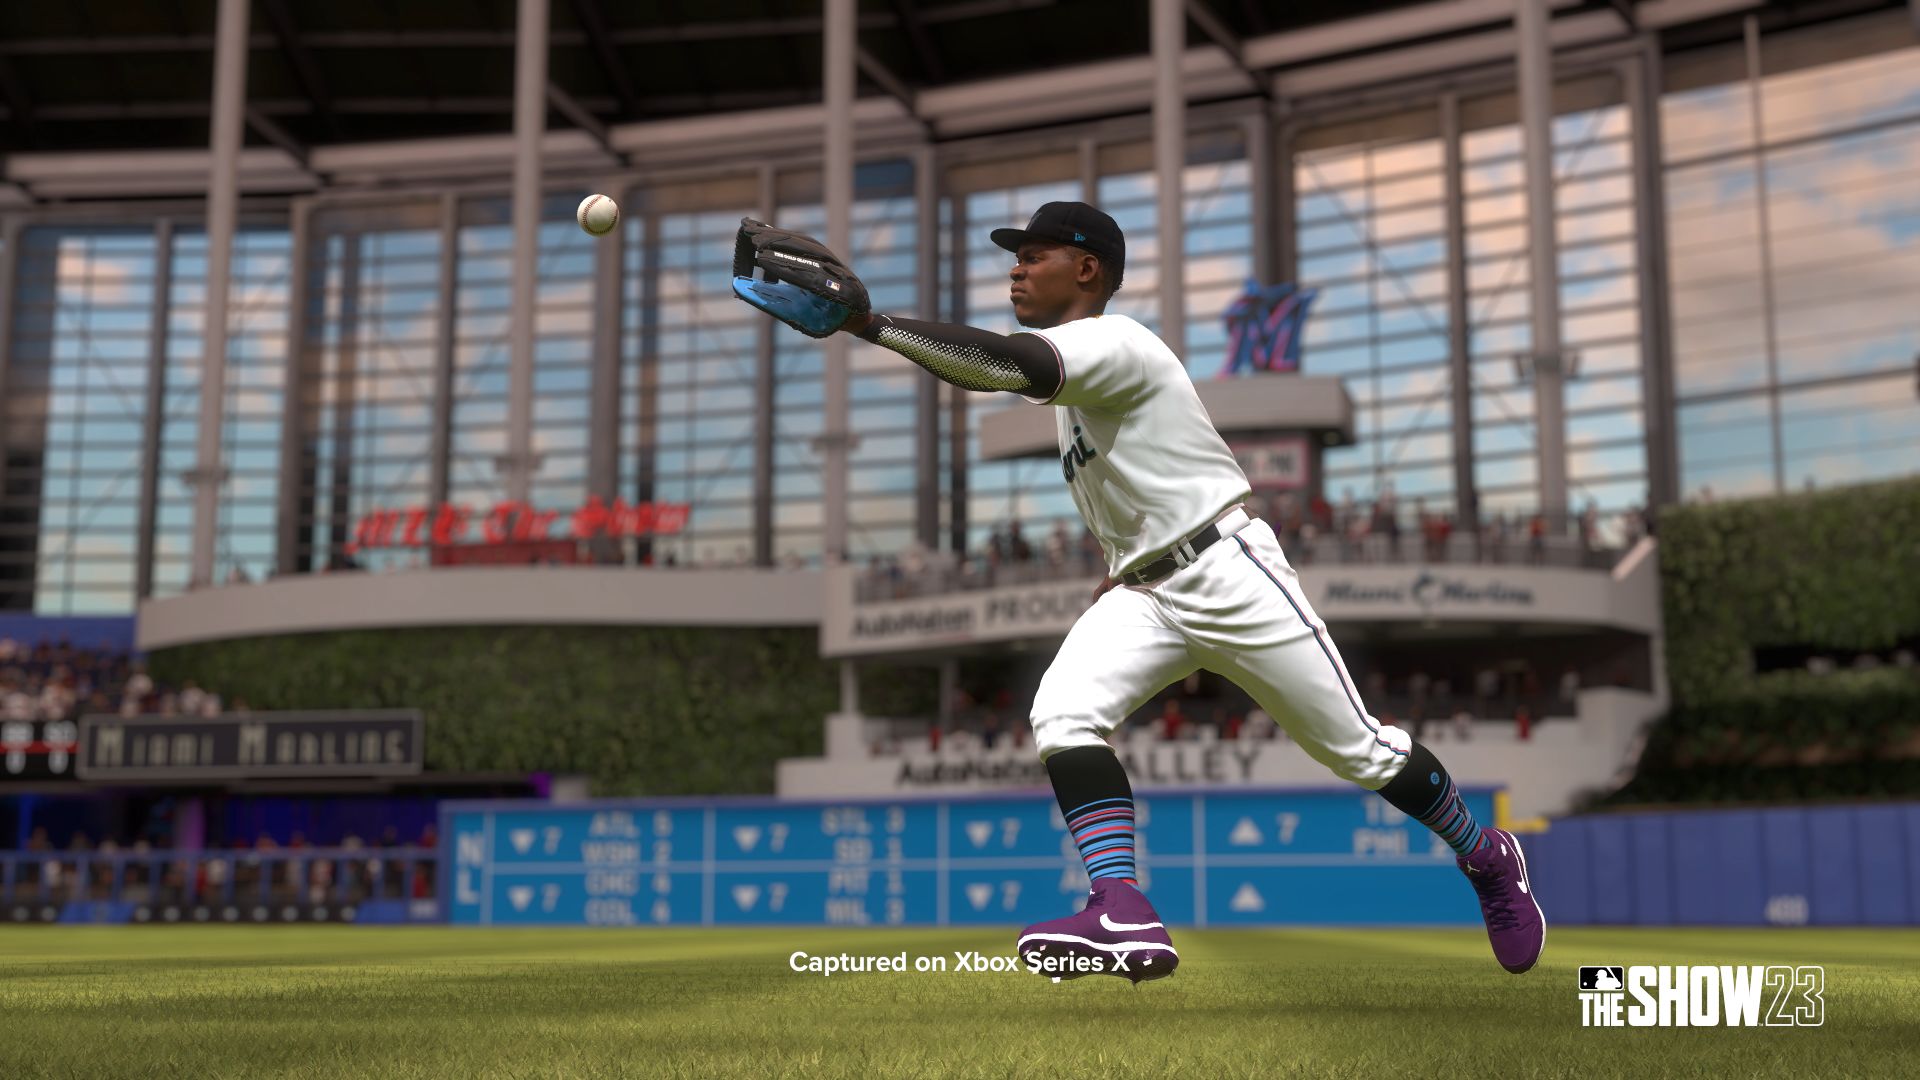 MLB The Show 23 - PS5 4K 60FPS Gameplay 